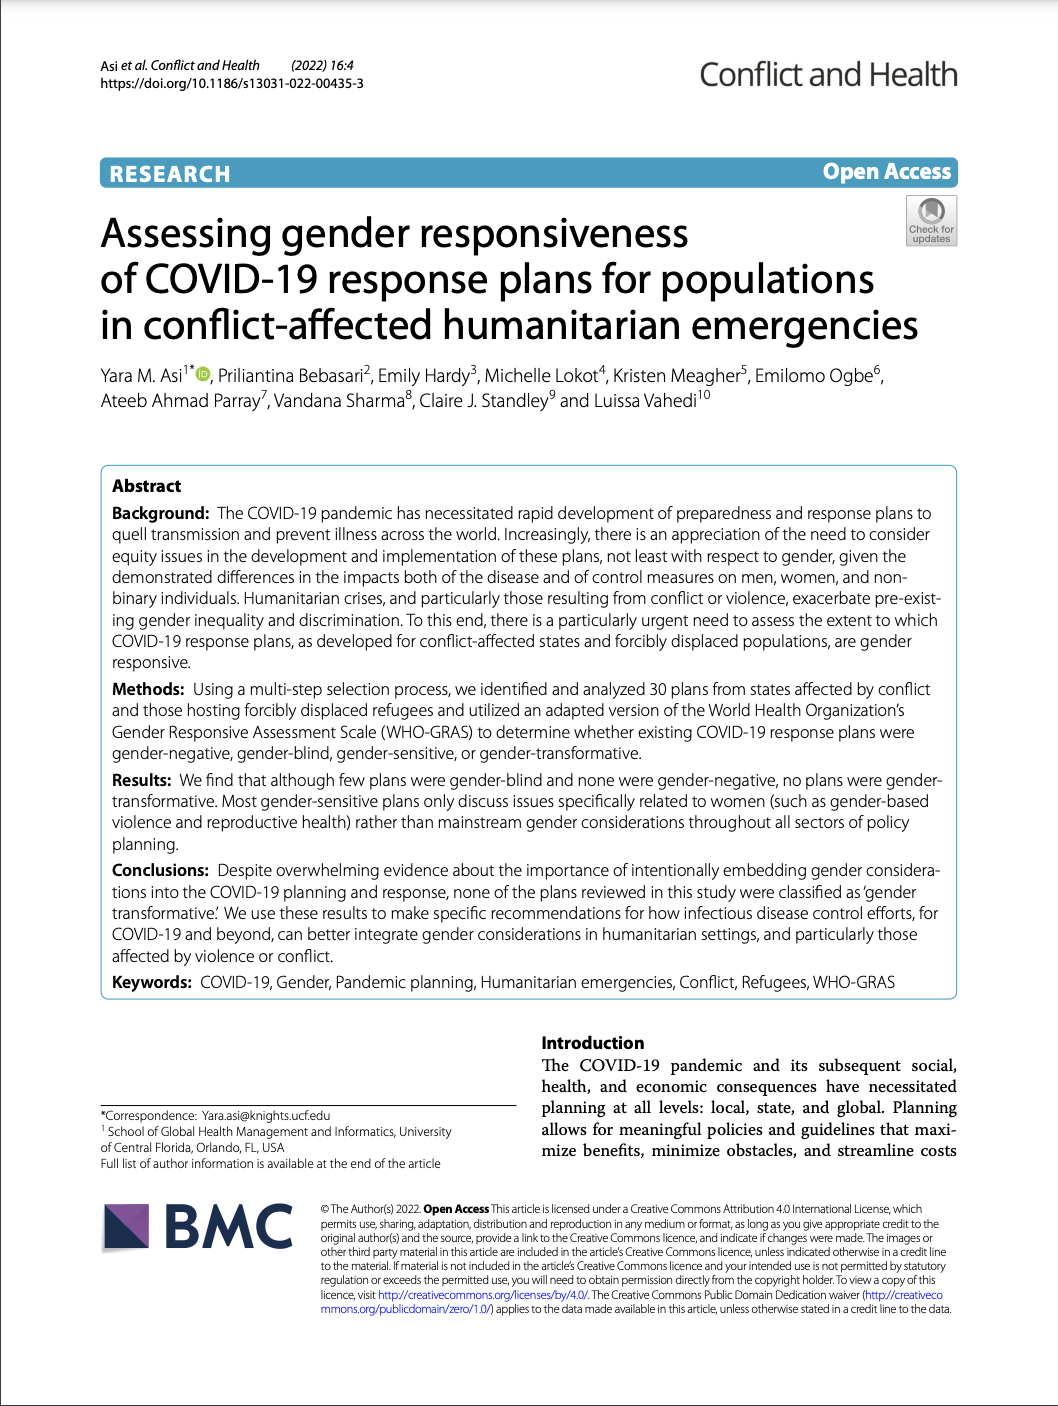 Assessing gender responsiveness of COVID-19 response plans for populations in conflict-affected humanitarian emergencies